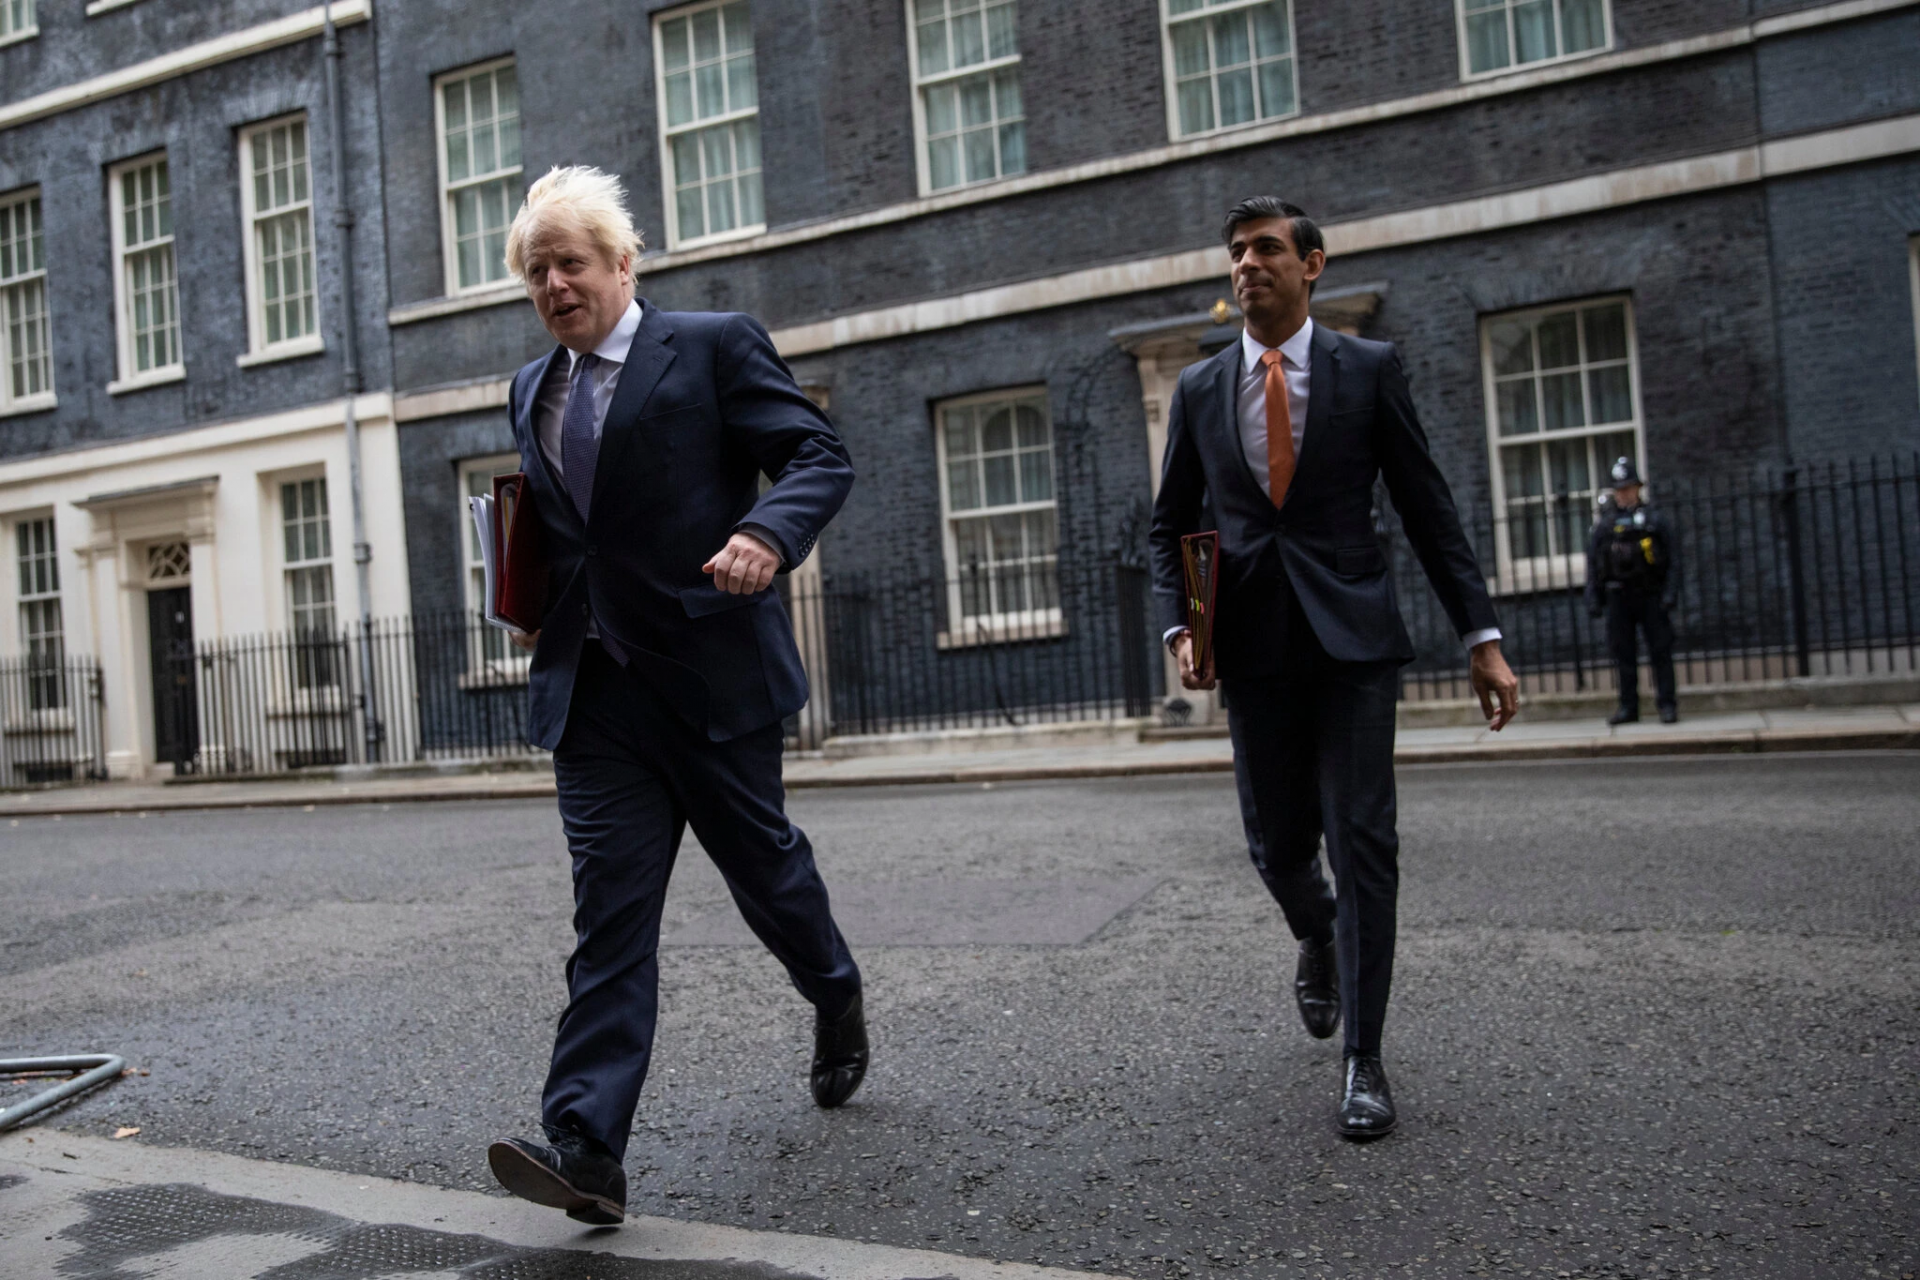 UK Prime Minister Boris Johnson Self-Isolates, Pleading People To "Stick With The Rules"